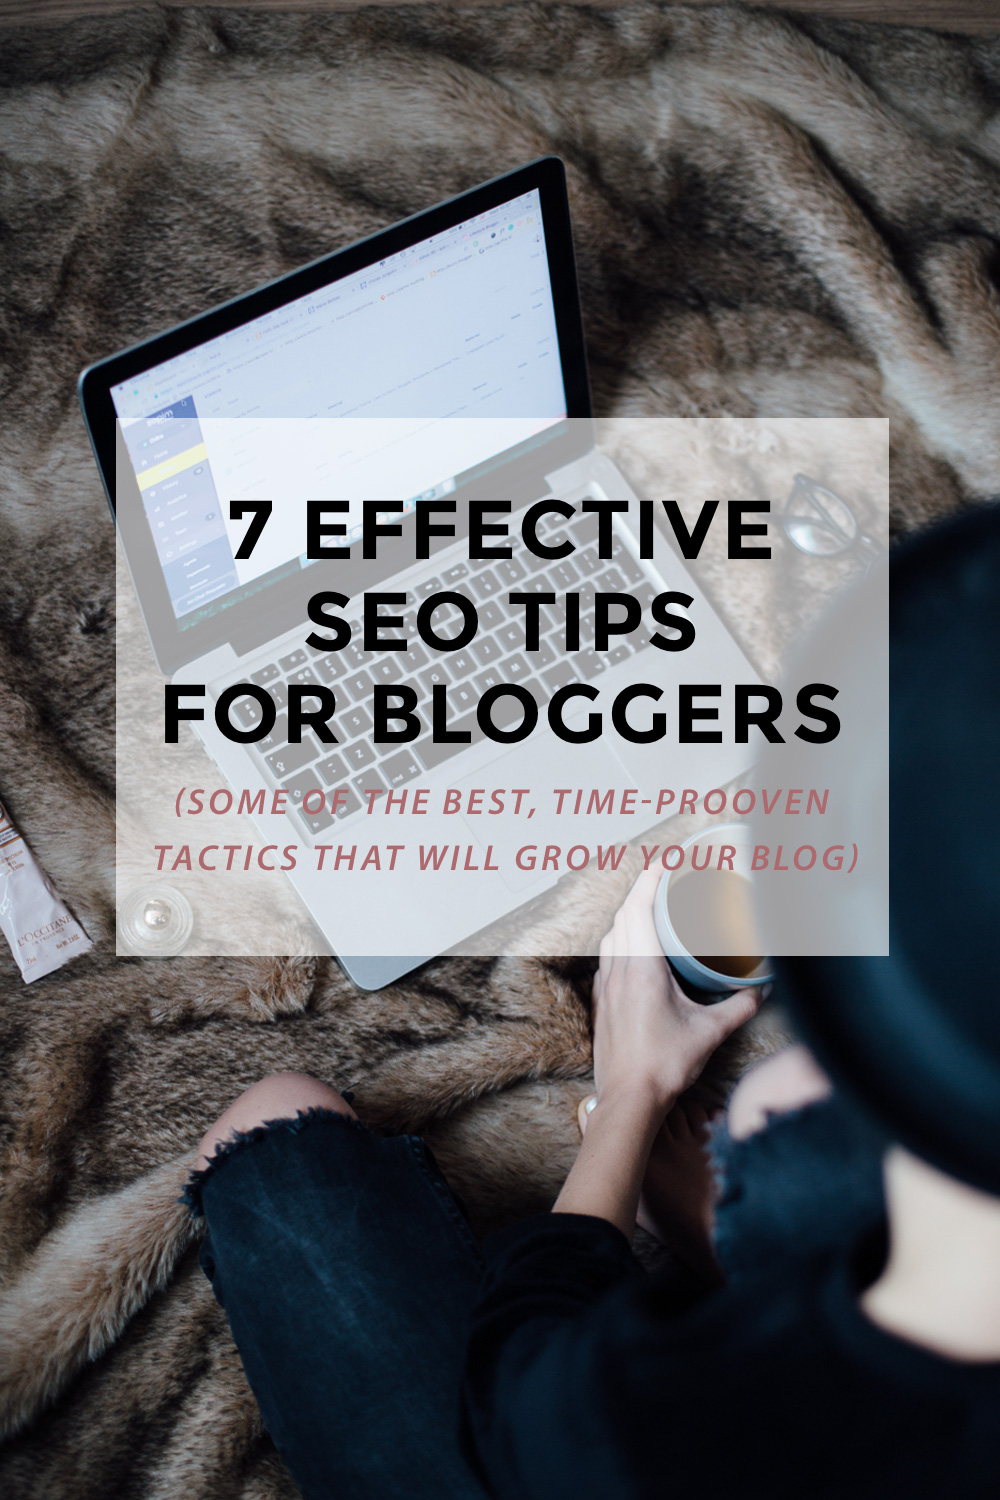 Google algorithm changes quite frequently, so it's impossible to catch on every single shift they make. However, some of the best, time-prooven tactics remained consistent. In this post, I'm going to share seven effective SEO tips that will help you blog better, attract more visitors & finally get the hang of all that SEO fuss. (blogging tips, seo tips for bloggers, improve seo on your blog, seo 101 for bloggers, blogging for money, blog business)